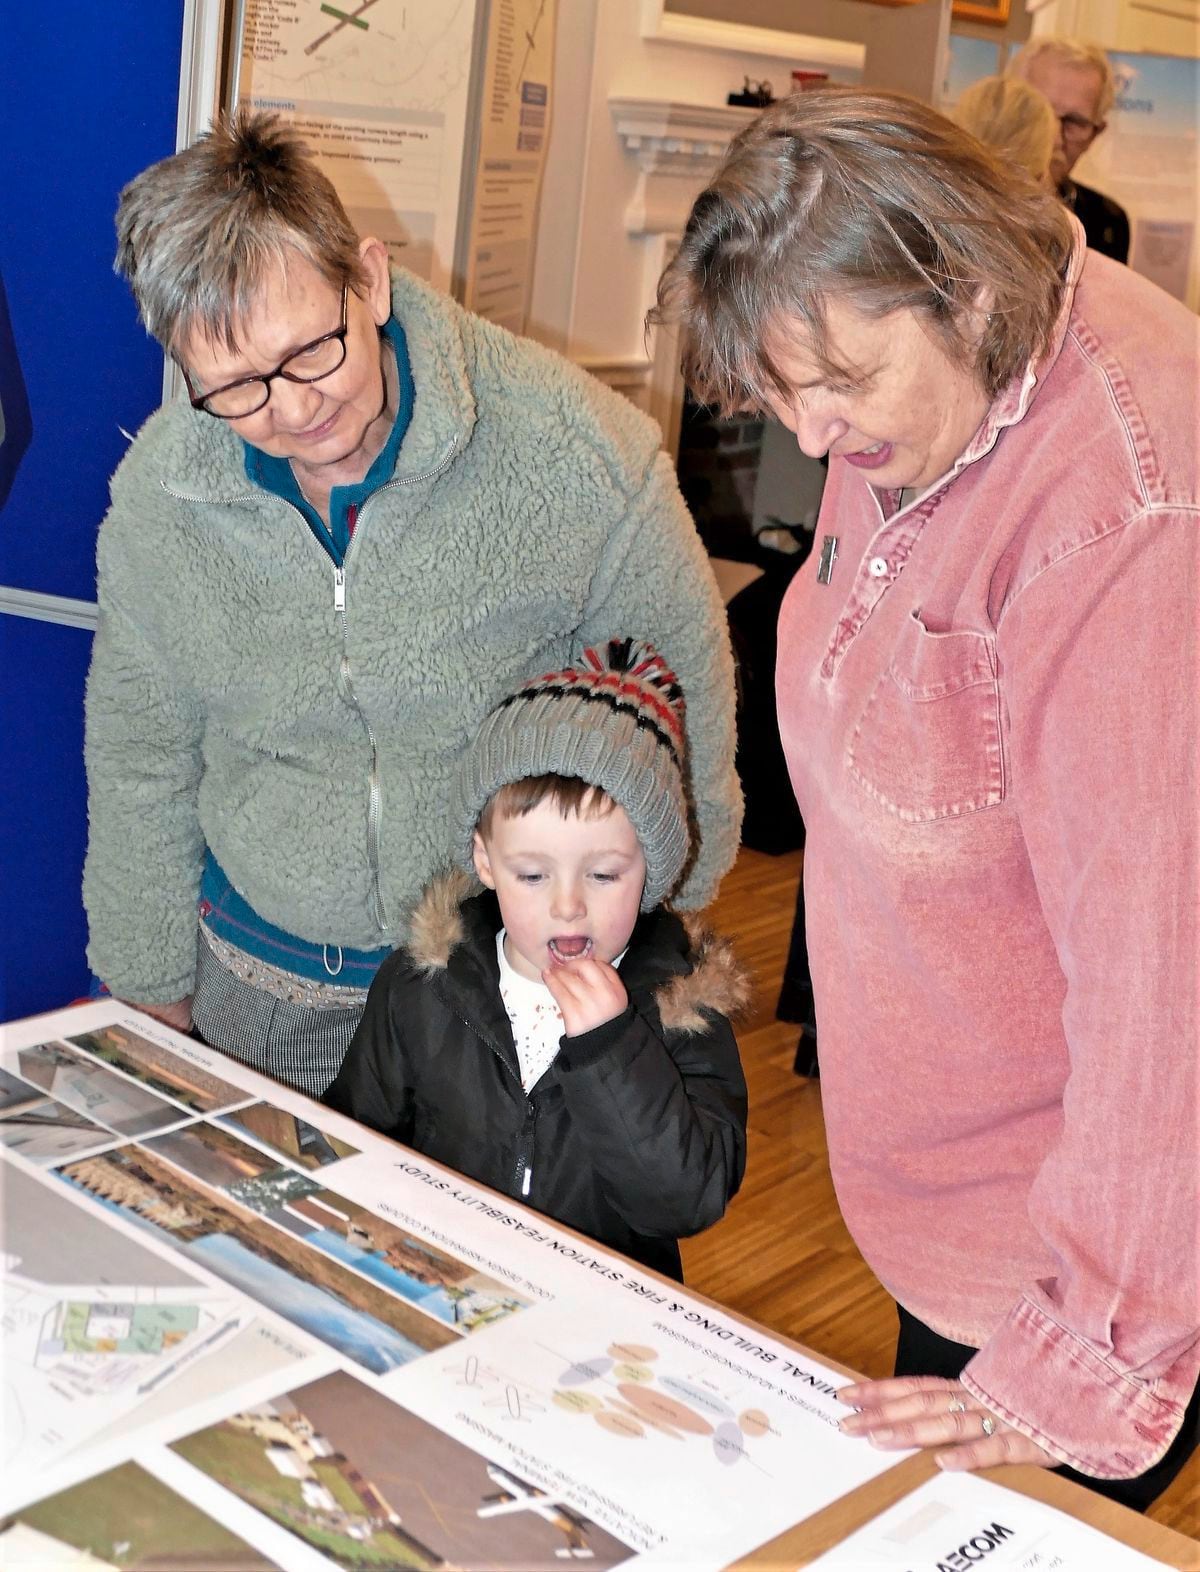 Three-year-old Brodi Pepper loves flying in the Dorniers and wants to be a pilot. He gave a thumbs-up to the plans and said he wanted to fly in a big Aurigny plane one day. He is watched by his granny Louise Bowman, left, and Alderney States member Annie Burgess, who chairs the Economic Development Committee.